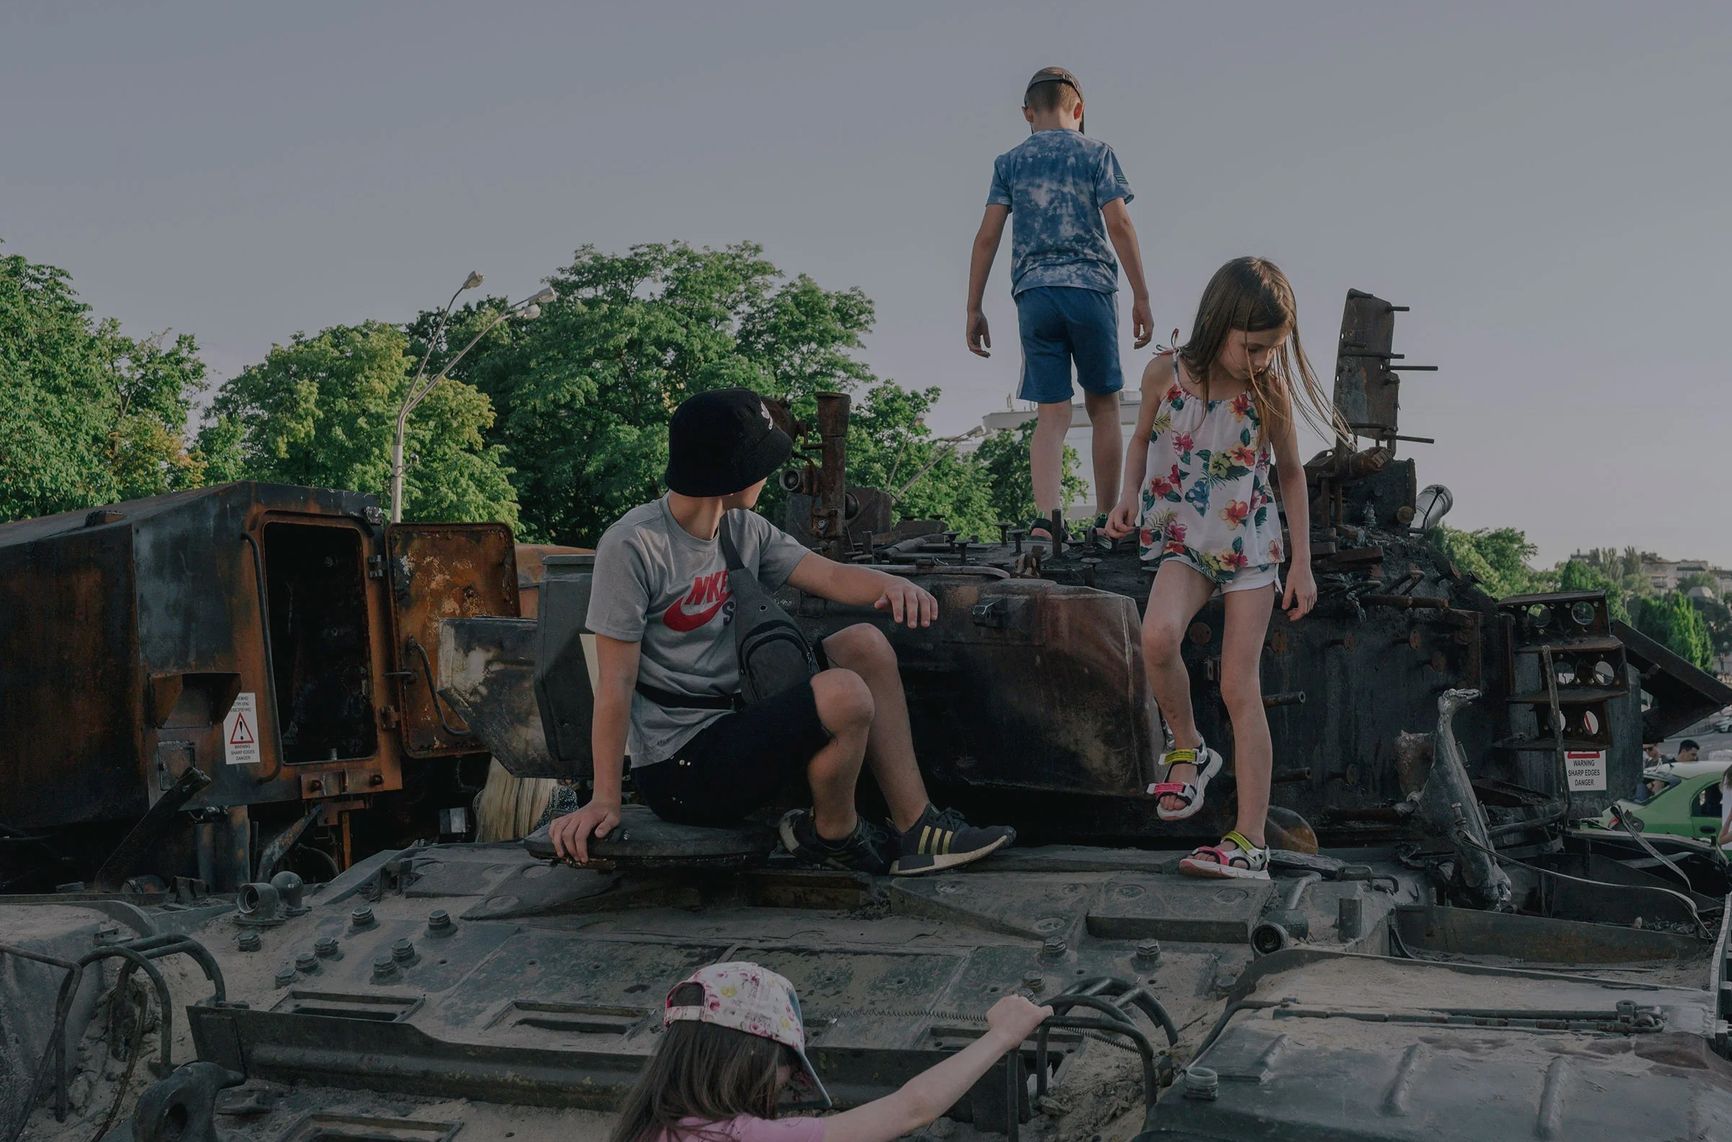 Children play on destroyed Russian war equipment in front of St. Michael‘s Monastery in Kyiv, Ukraine, on June 12.